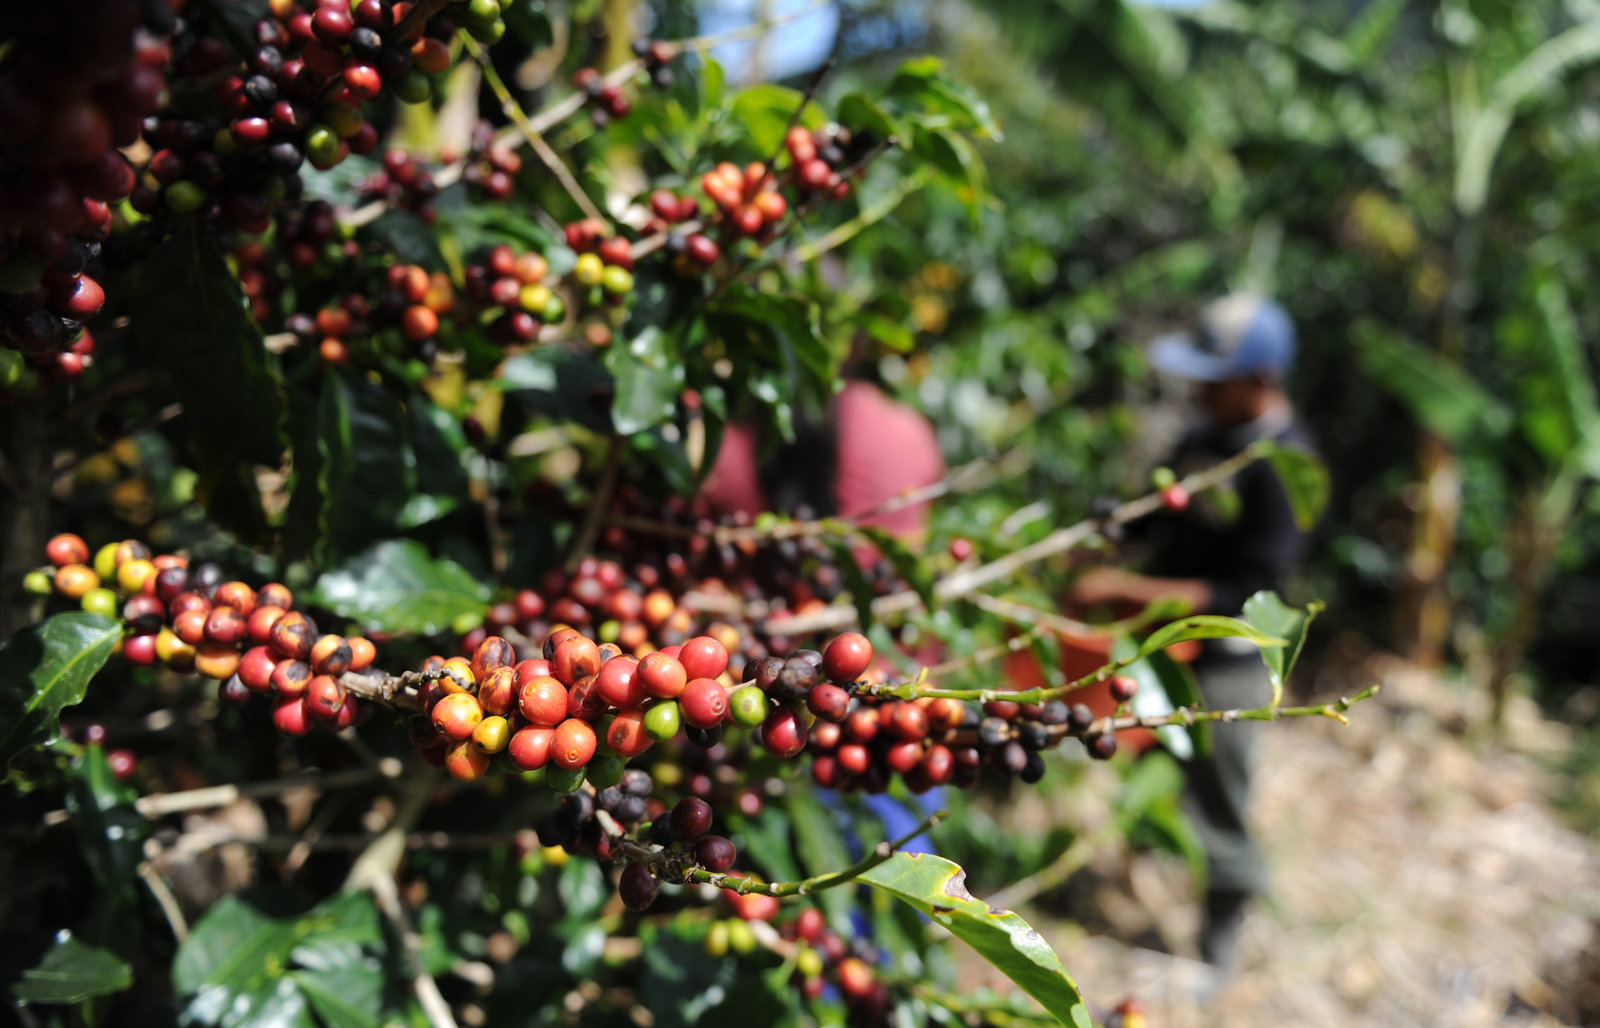 Global climate change is serious, will Australia become a suitable new coffee growing area?